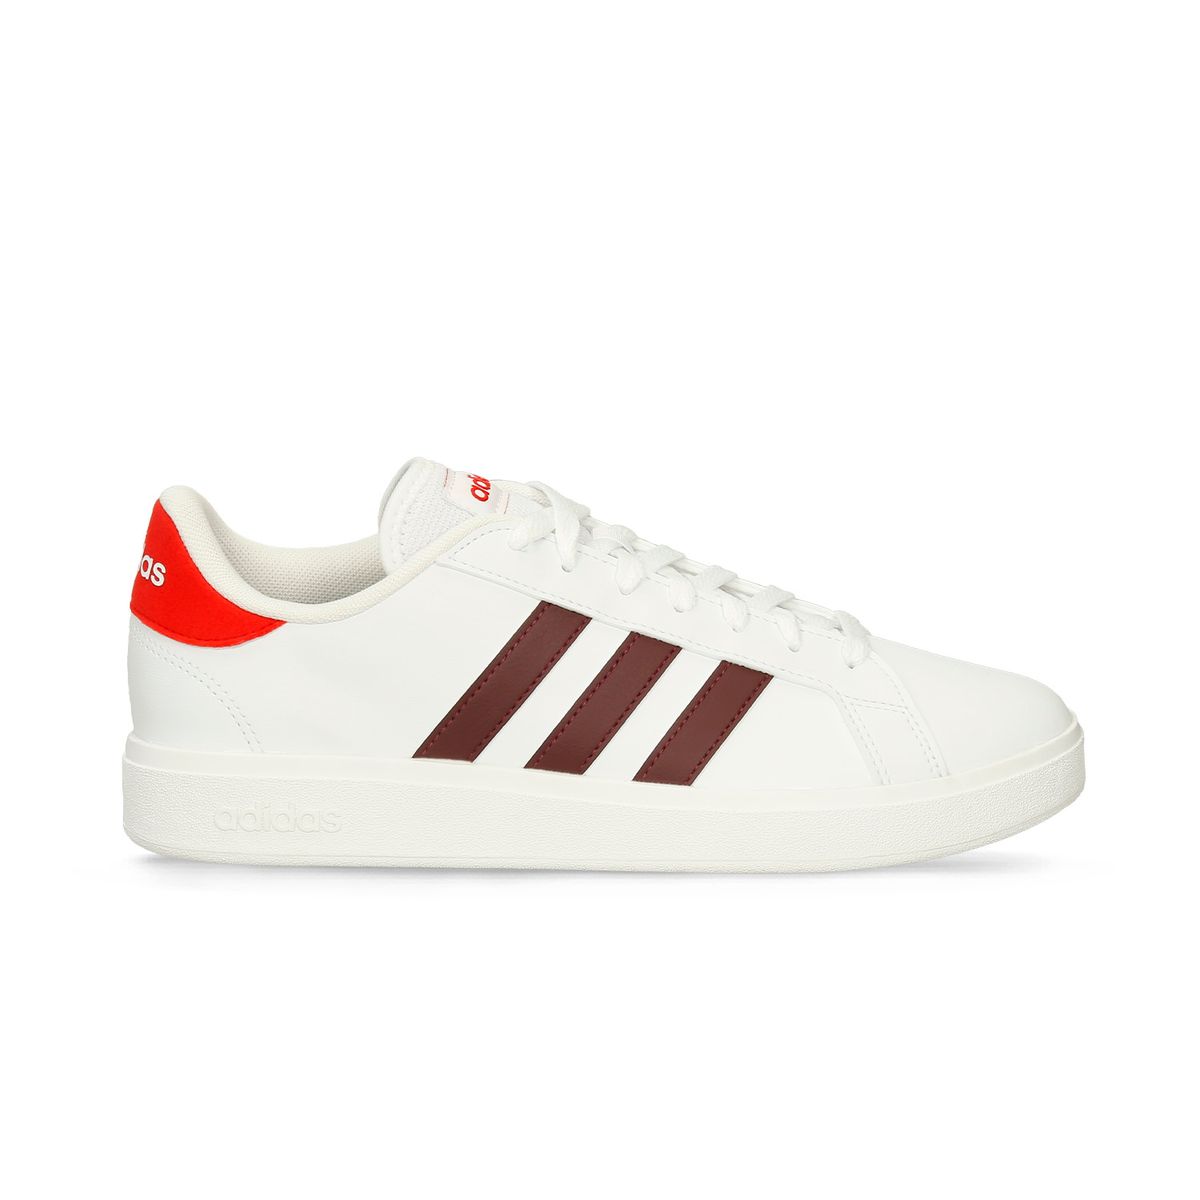 Tenis Casuales Blanco Adidas Grand Court Base 2. Hombre